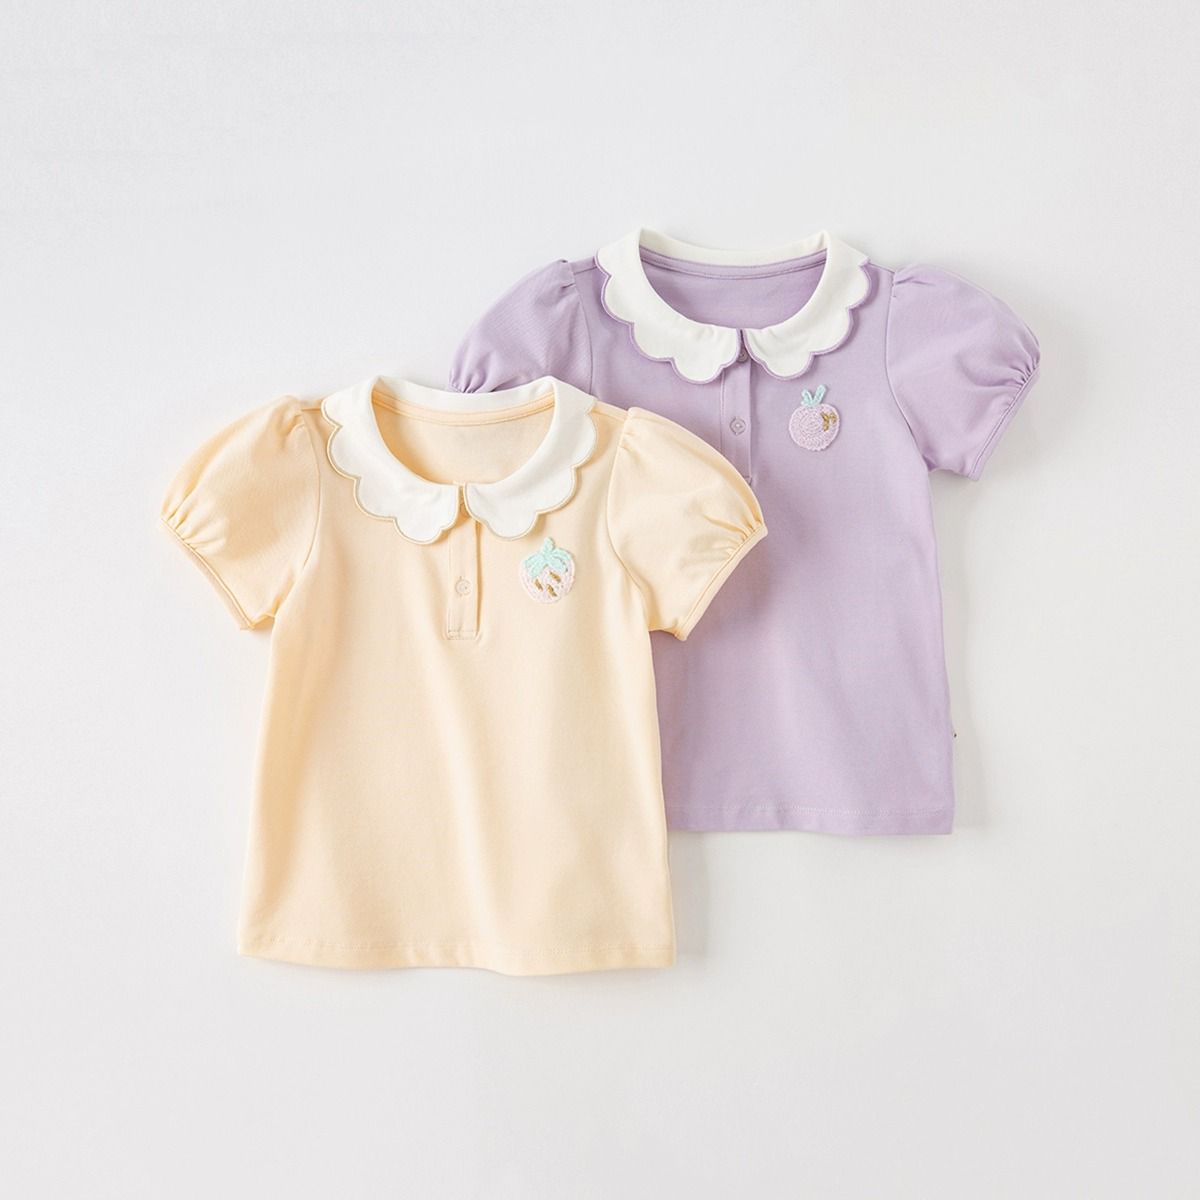 Children's T-shirt  summer new style girls POLO shirt for small and medium-sized children baby doll collar fashionable thin top 1-3 years old